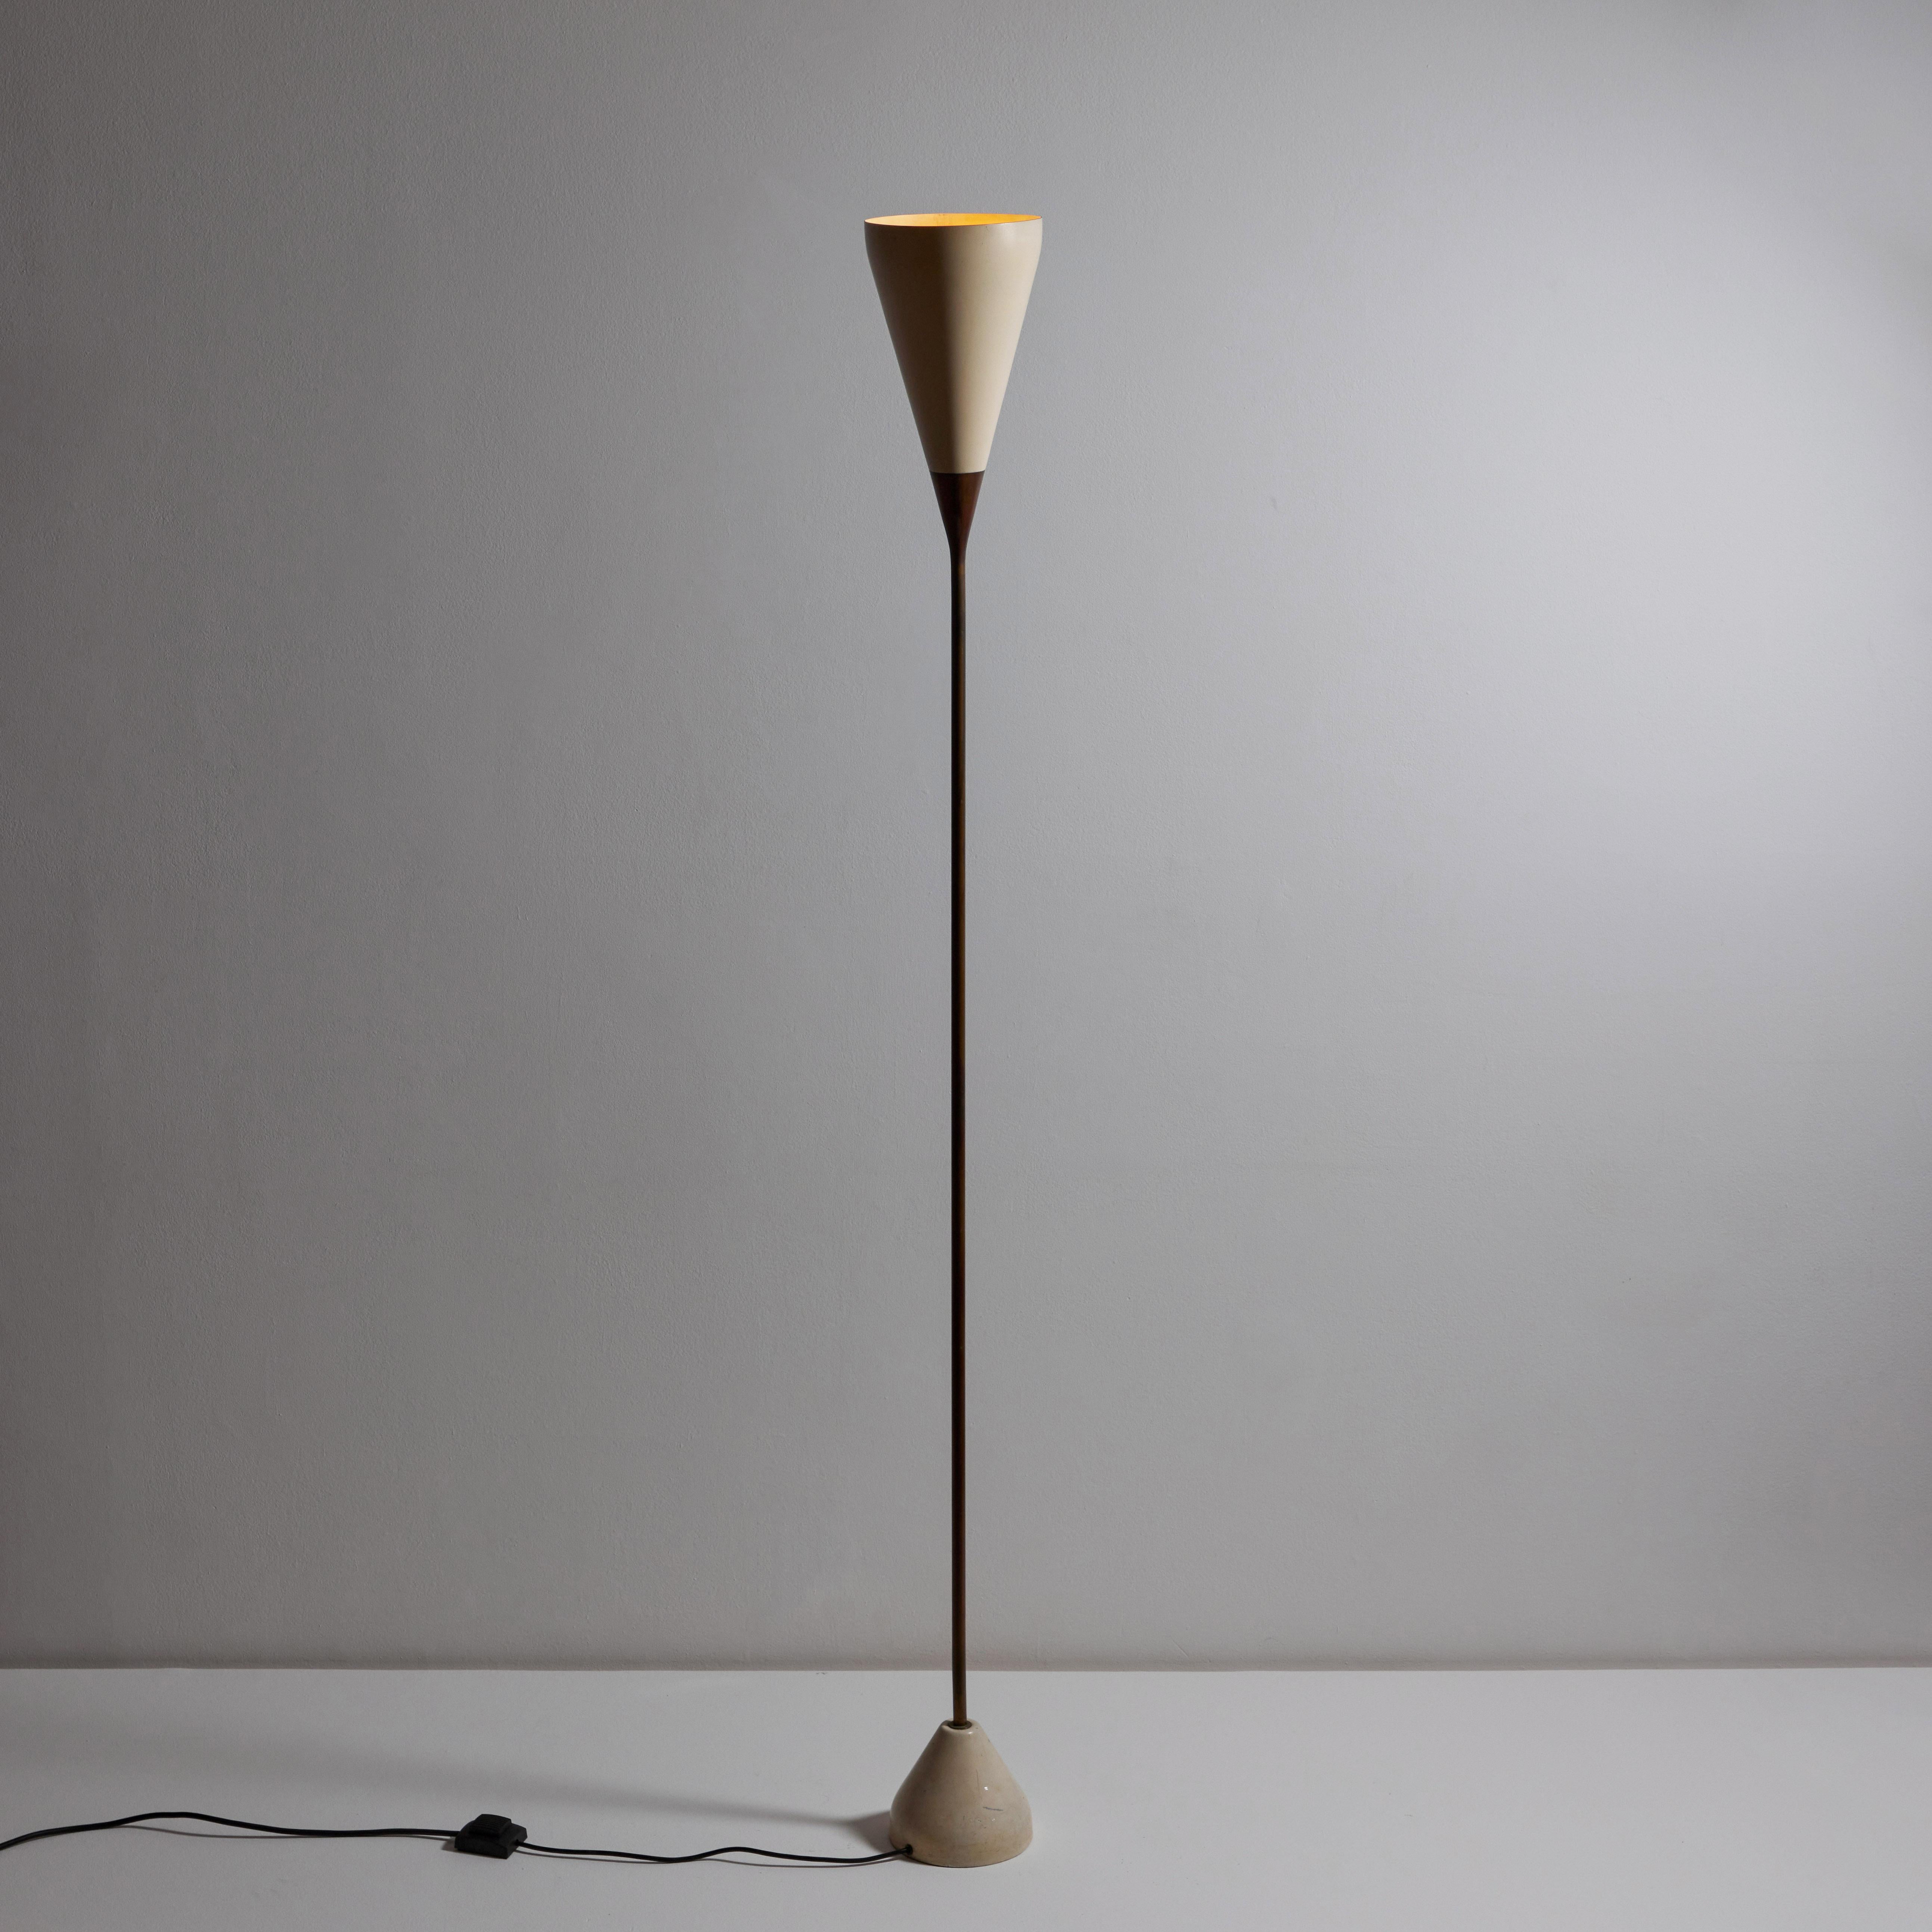 Model No. B-30 floor lamp by Franco Buzzi for Oluce. Designed and manufactured in Italy, circa 1950s. Enameled metal, brass, marble base. Original EU cord. We recommend one E27 100w maximum bulb. Bulbs not included.